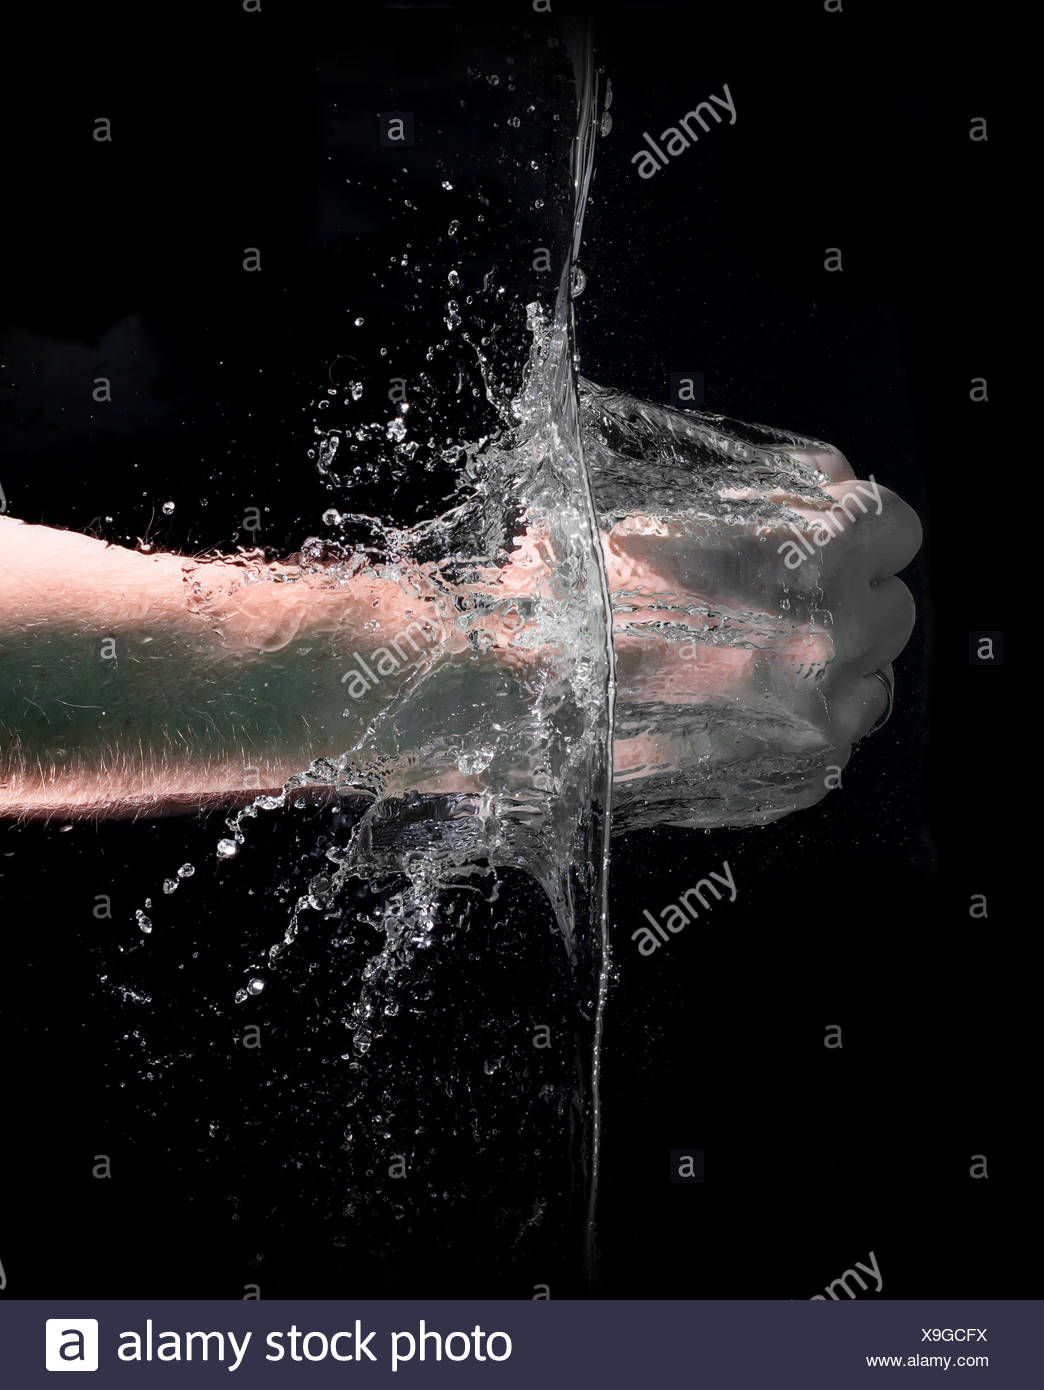 Fist Punch Into Water With Big Splashes On A Black Background